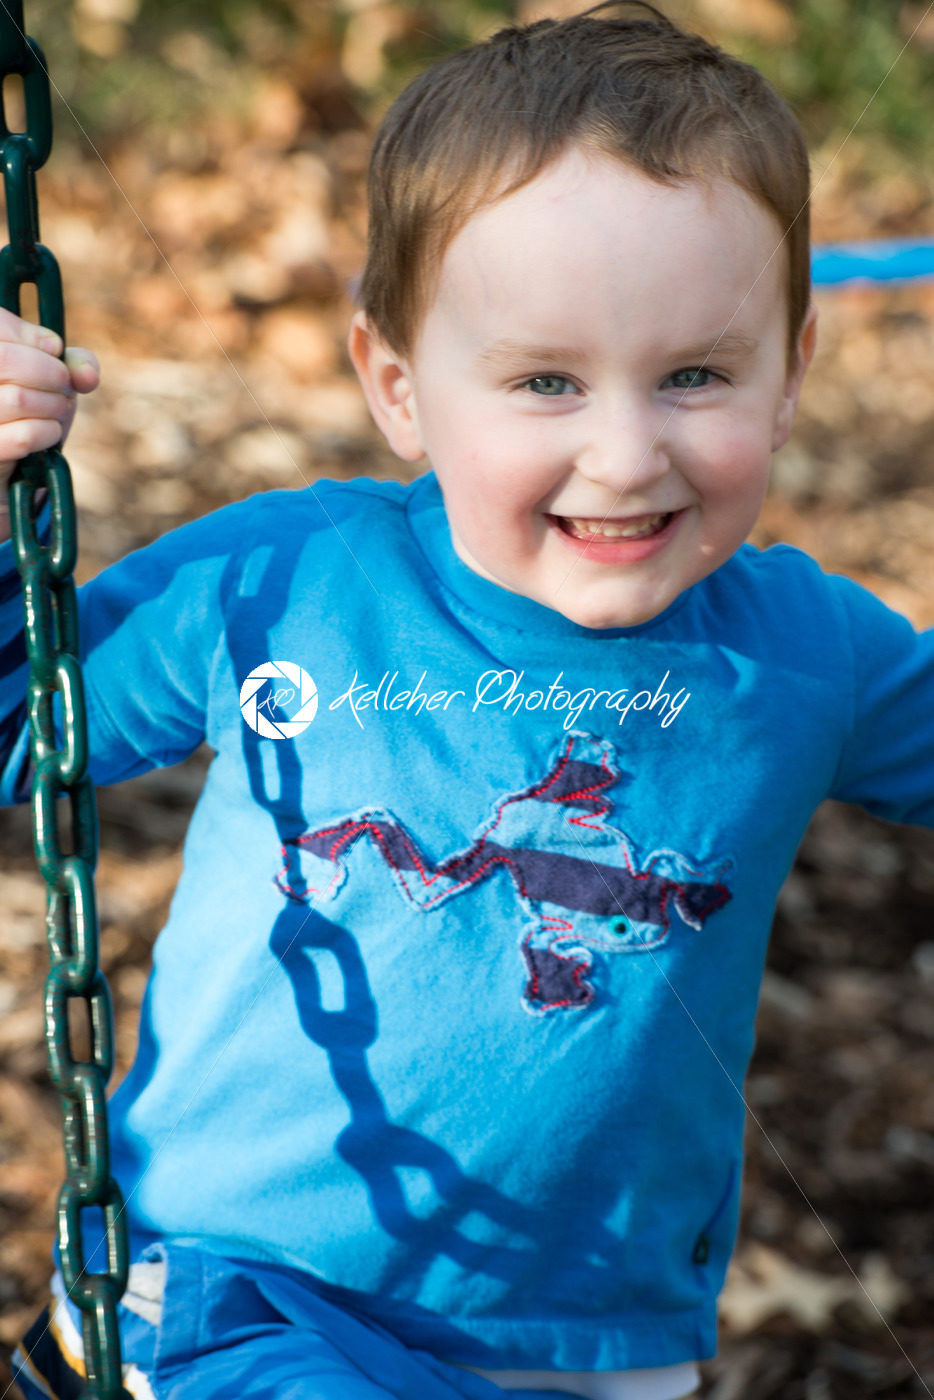 Young boy having fun outside at park on a playground swing set - Kelleher Photography Store